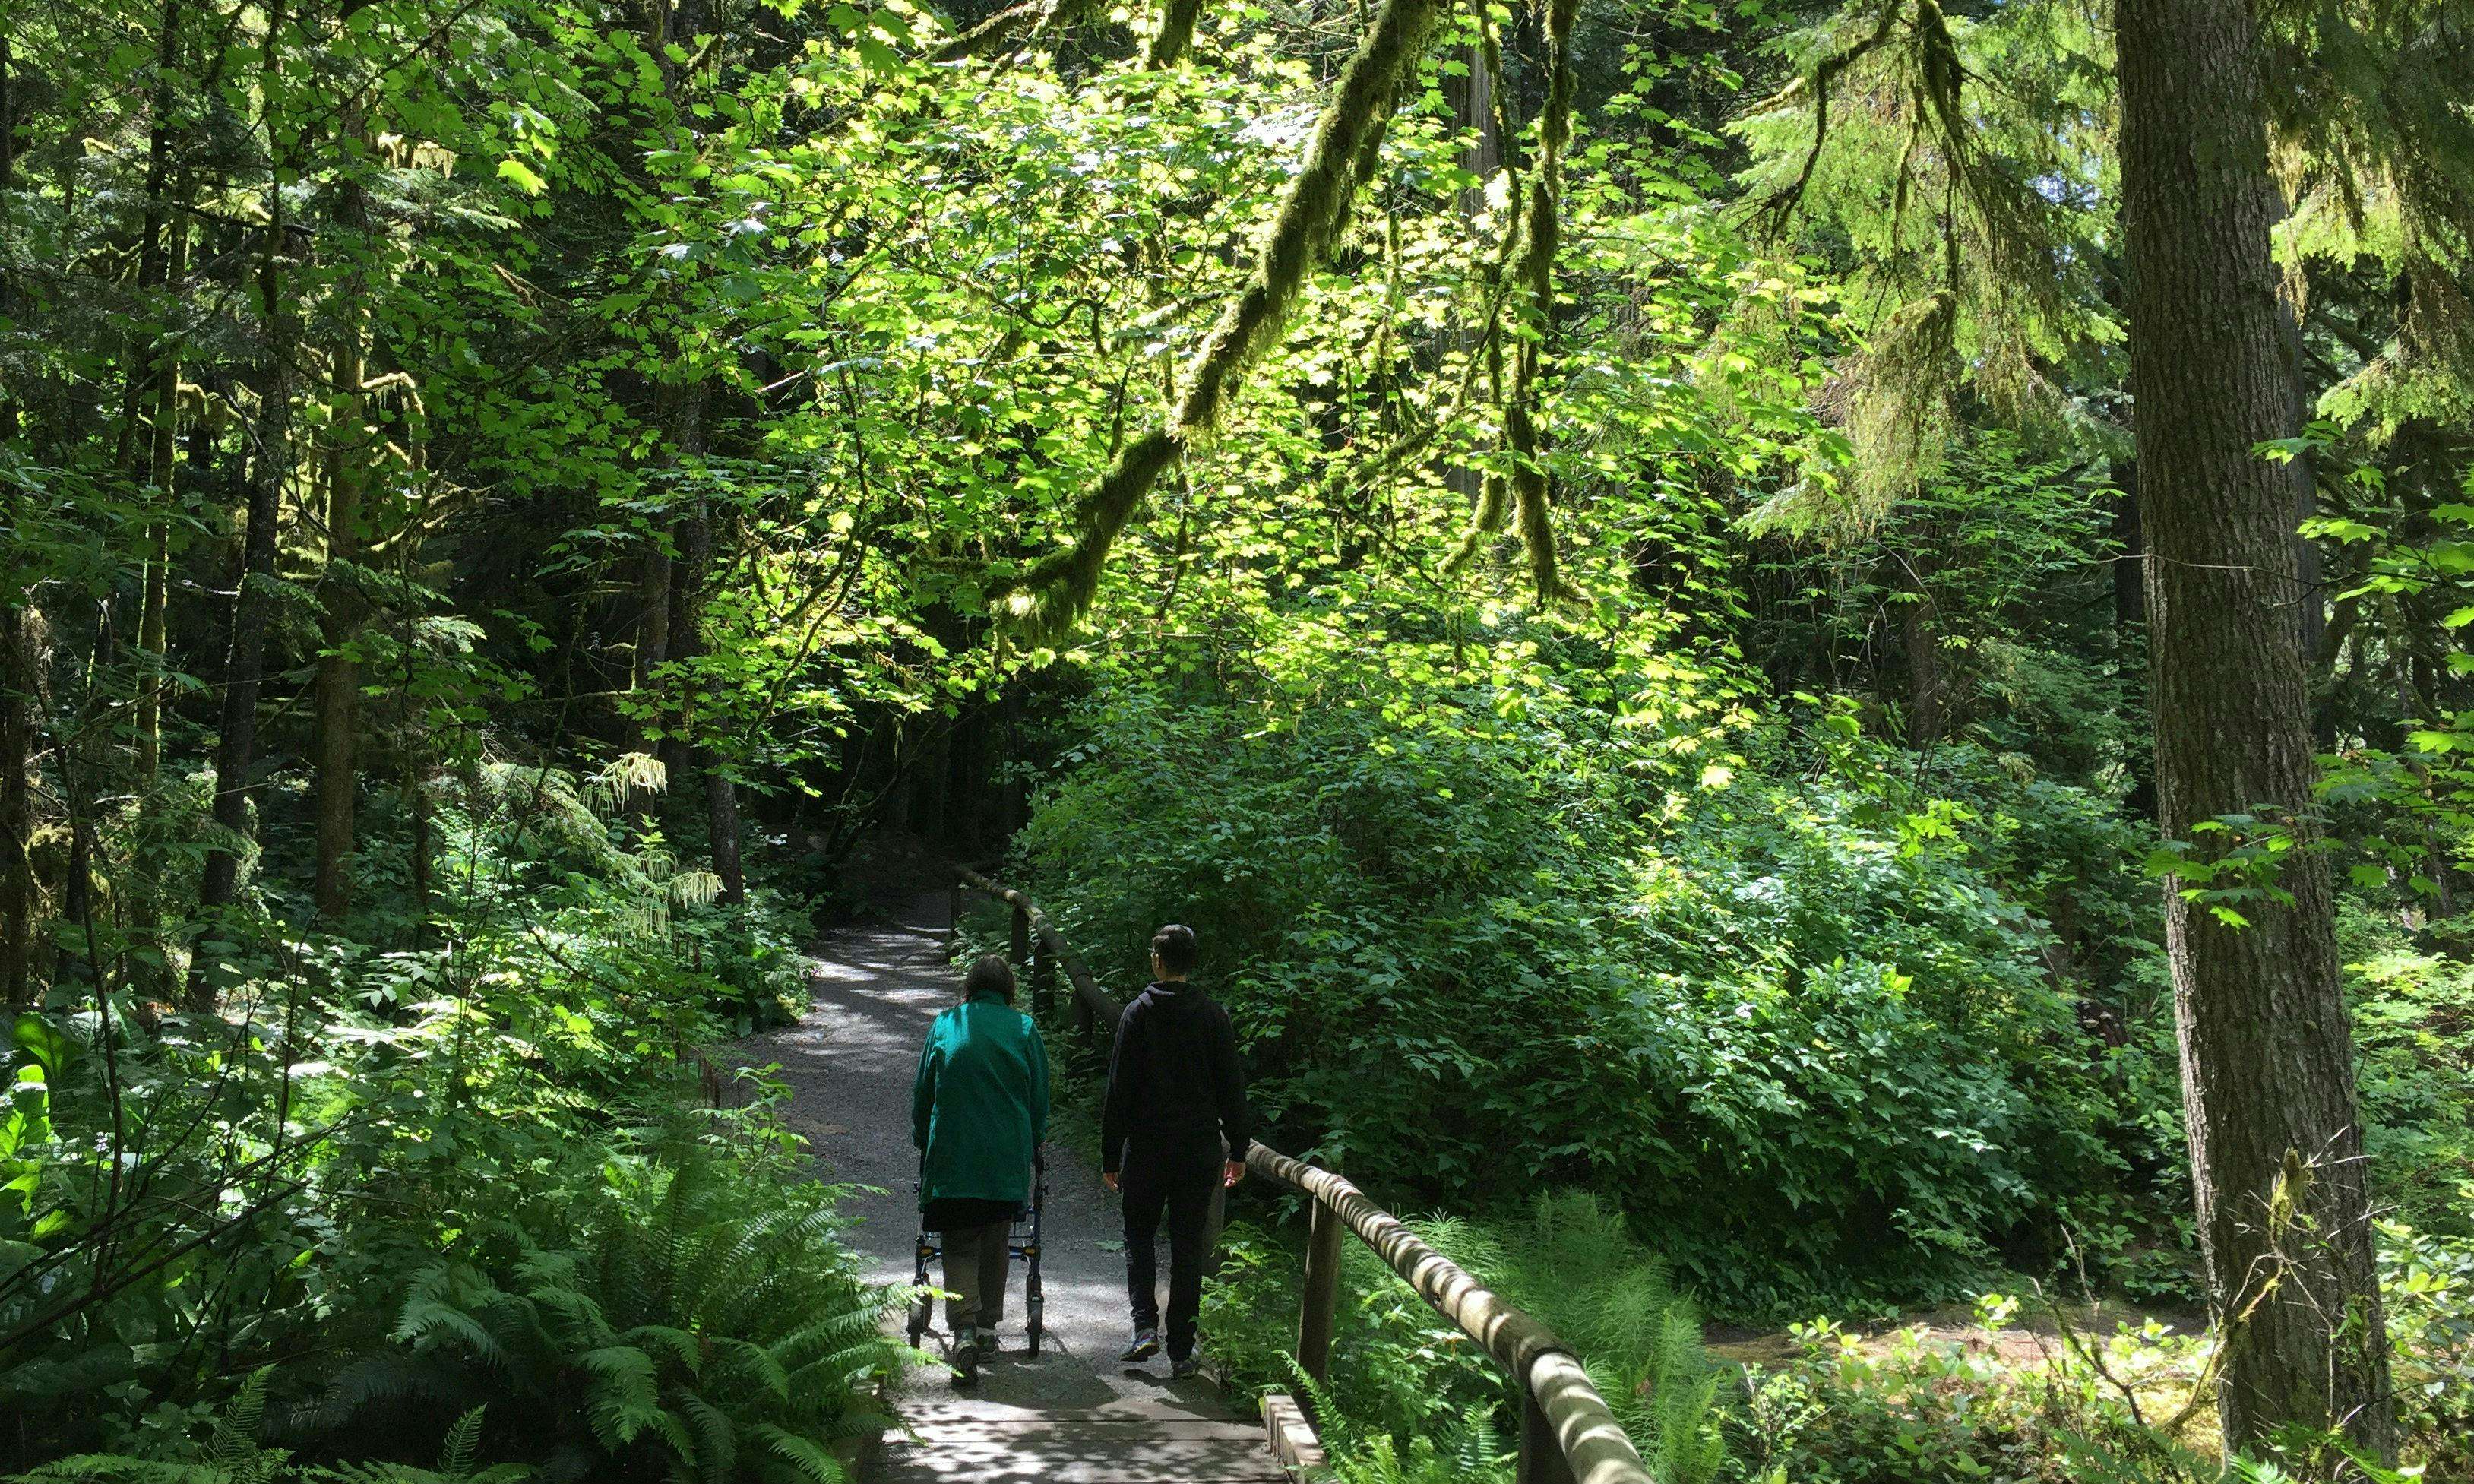 Two people walk on a trail through a lush green forest